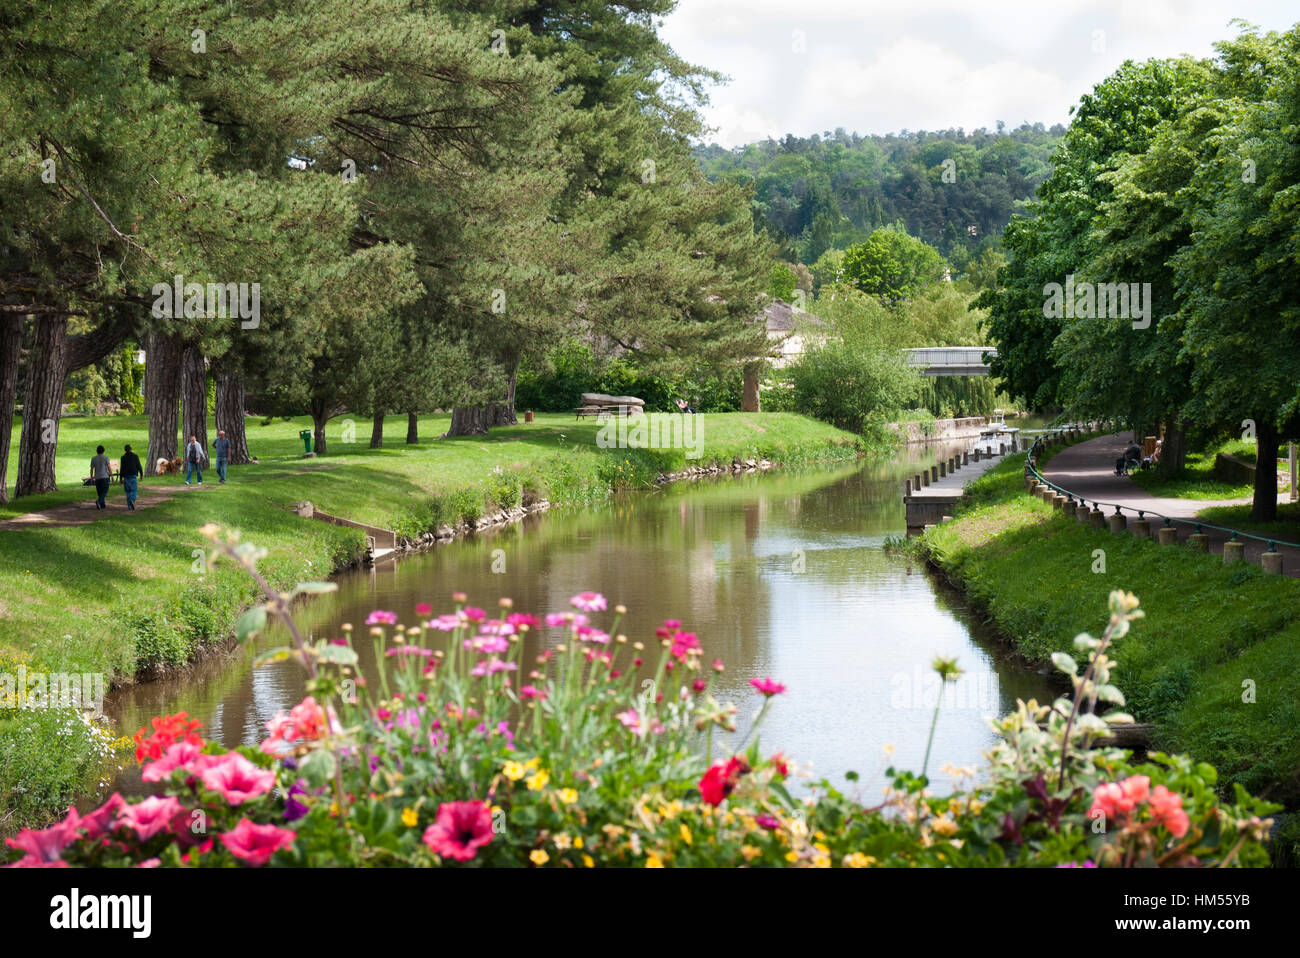 'Nantes Brest canal' Brittany France, Stock Photo